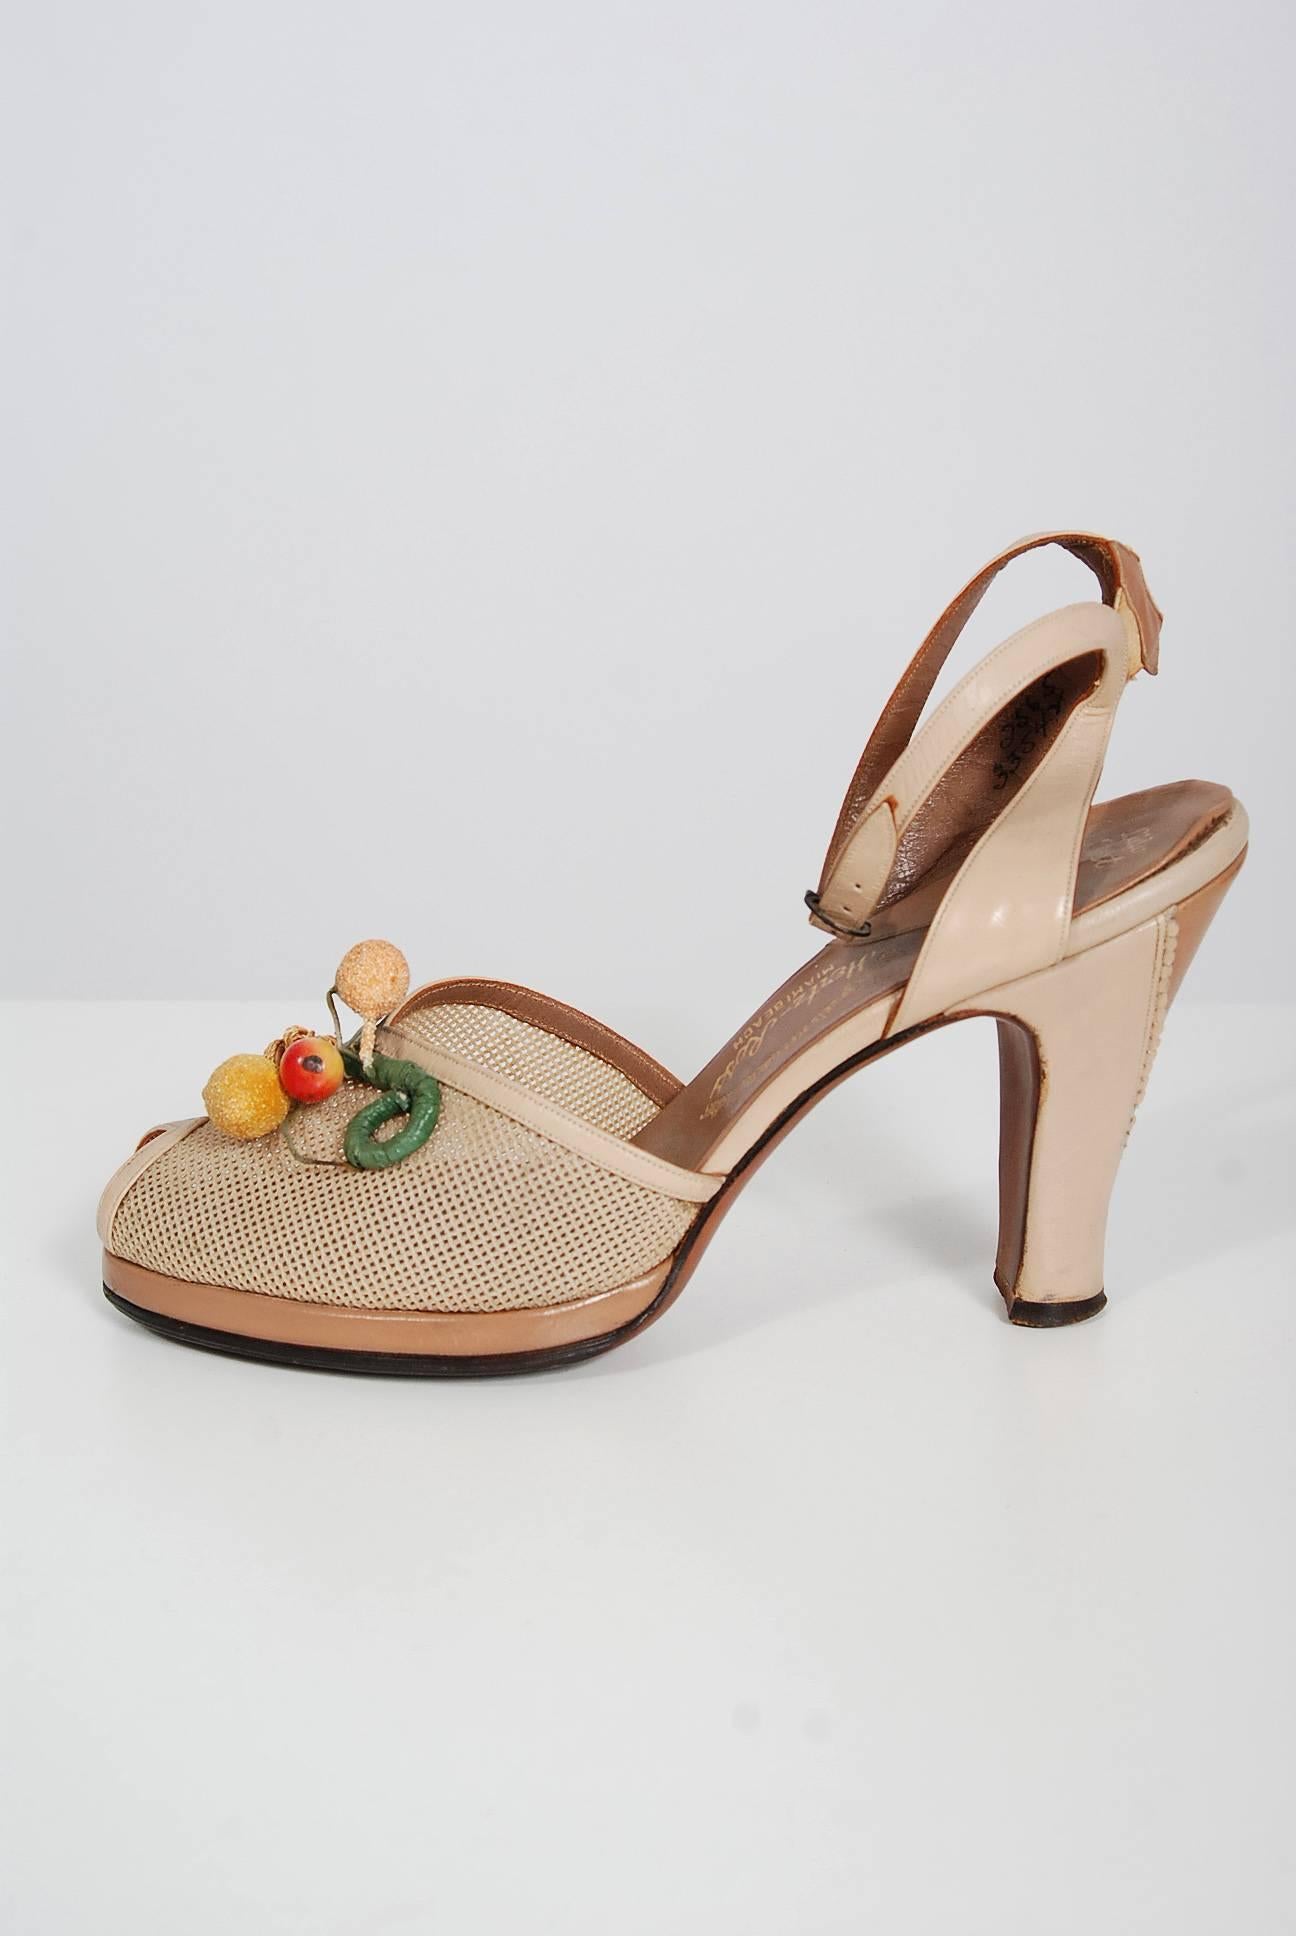 1940's Colorful Fruit Applique Novelty Leather Peep-Toe Heels & Matching Purse 2